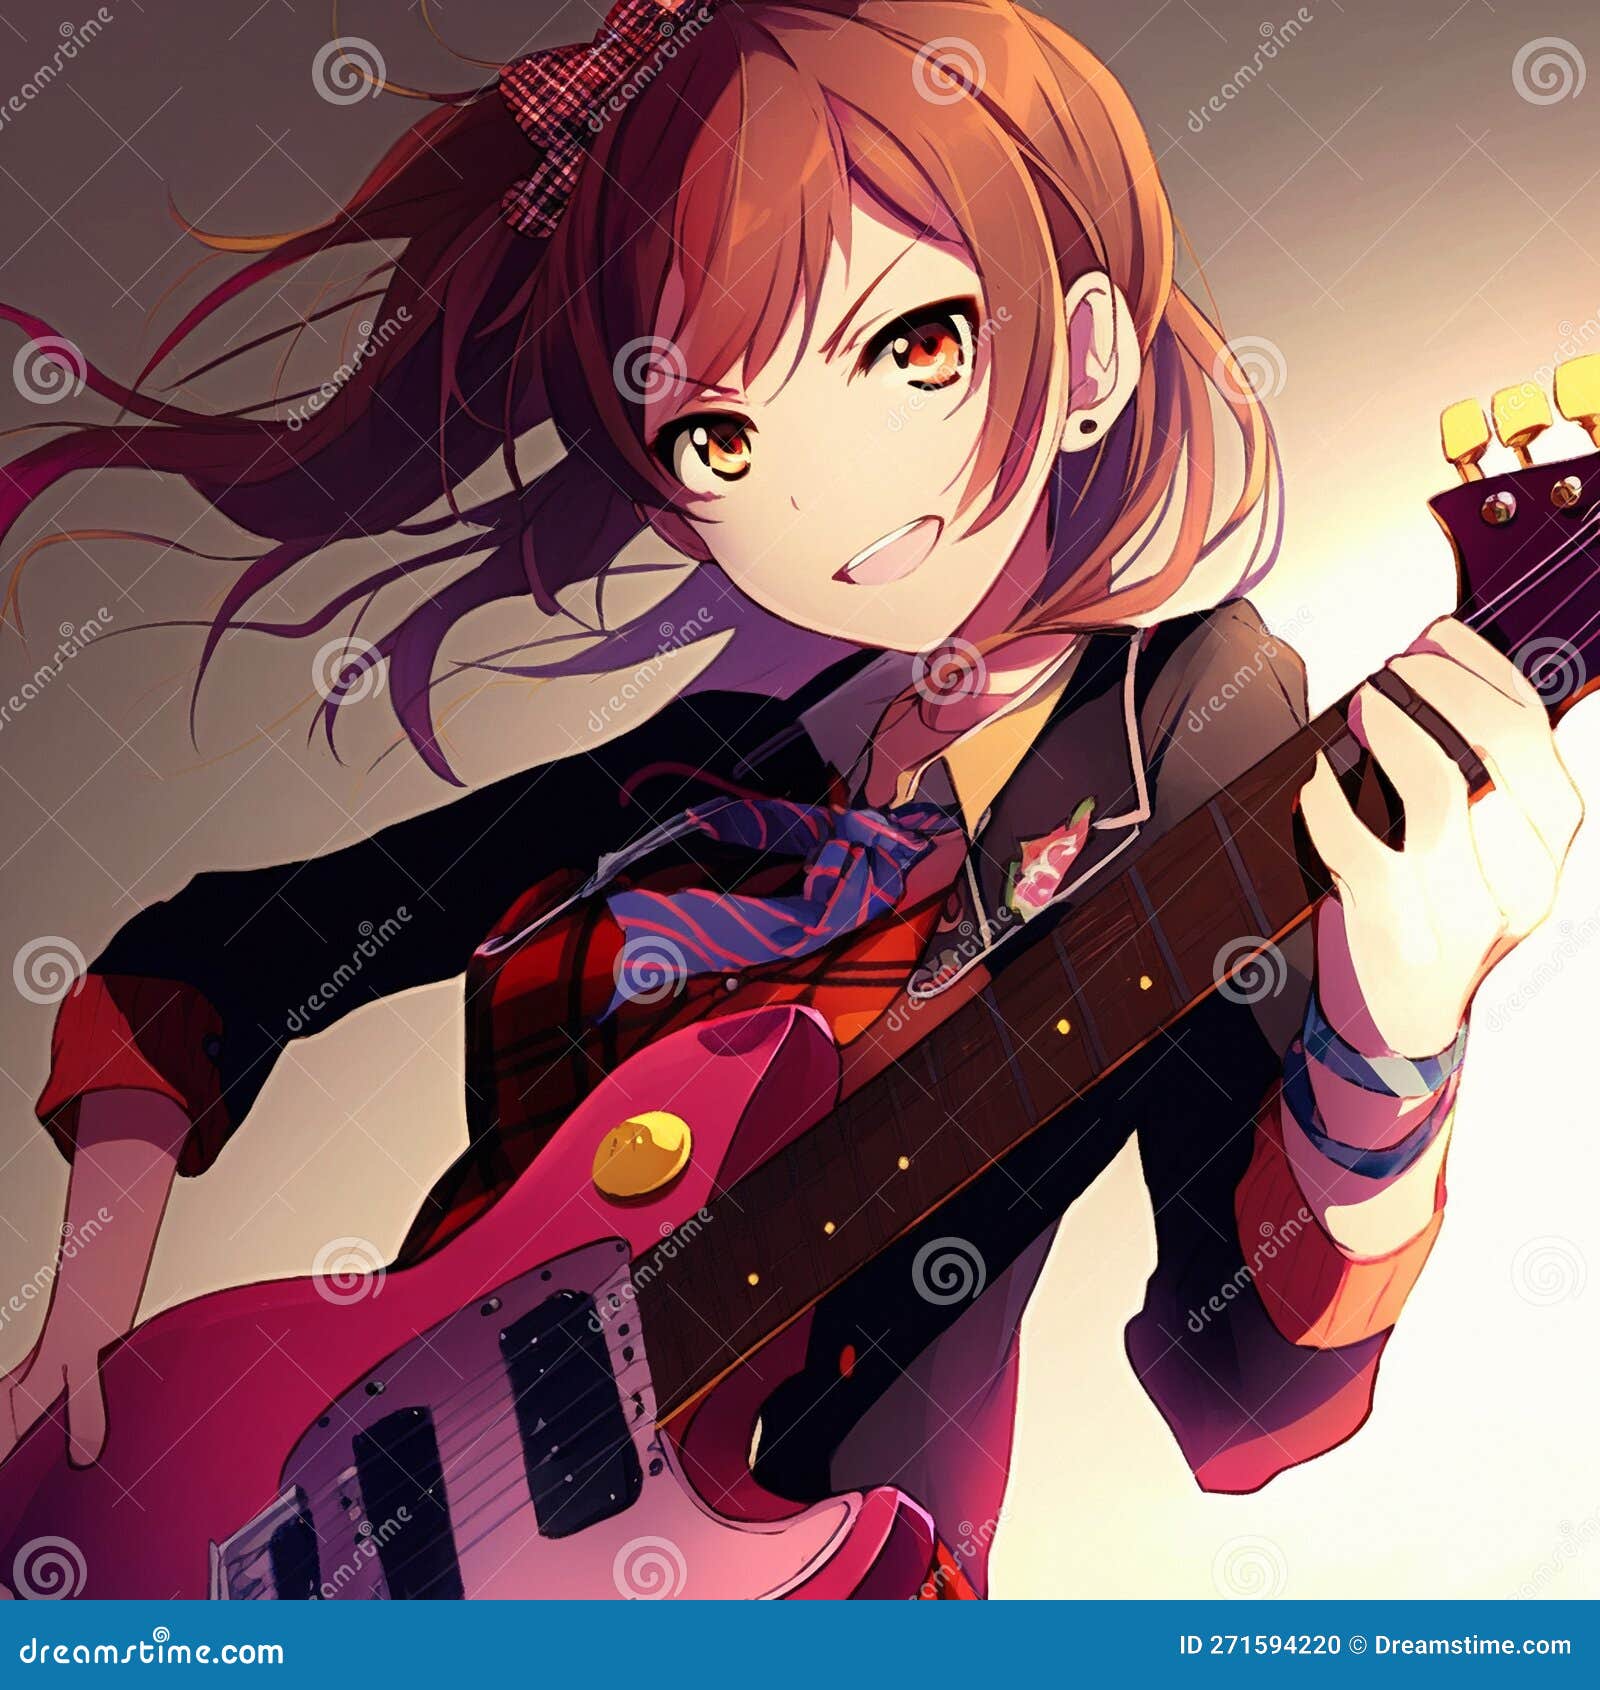 Premium Photo | A girl plays an electric guitar in the anime style